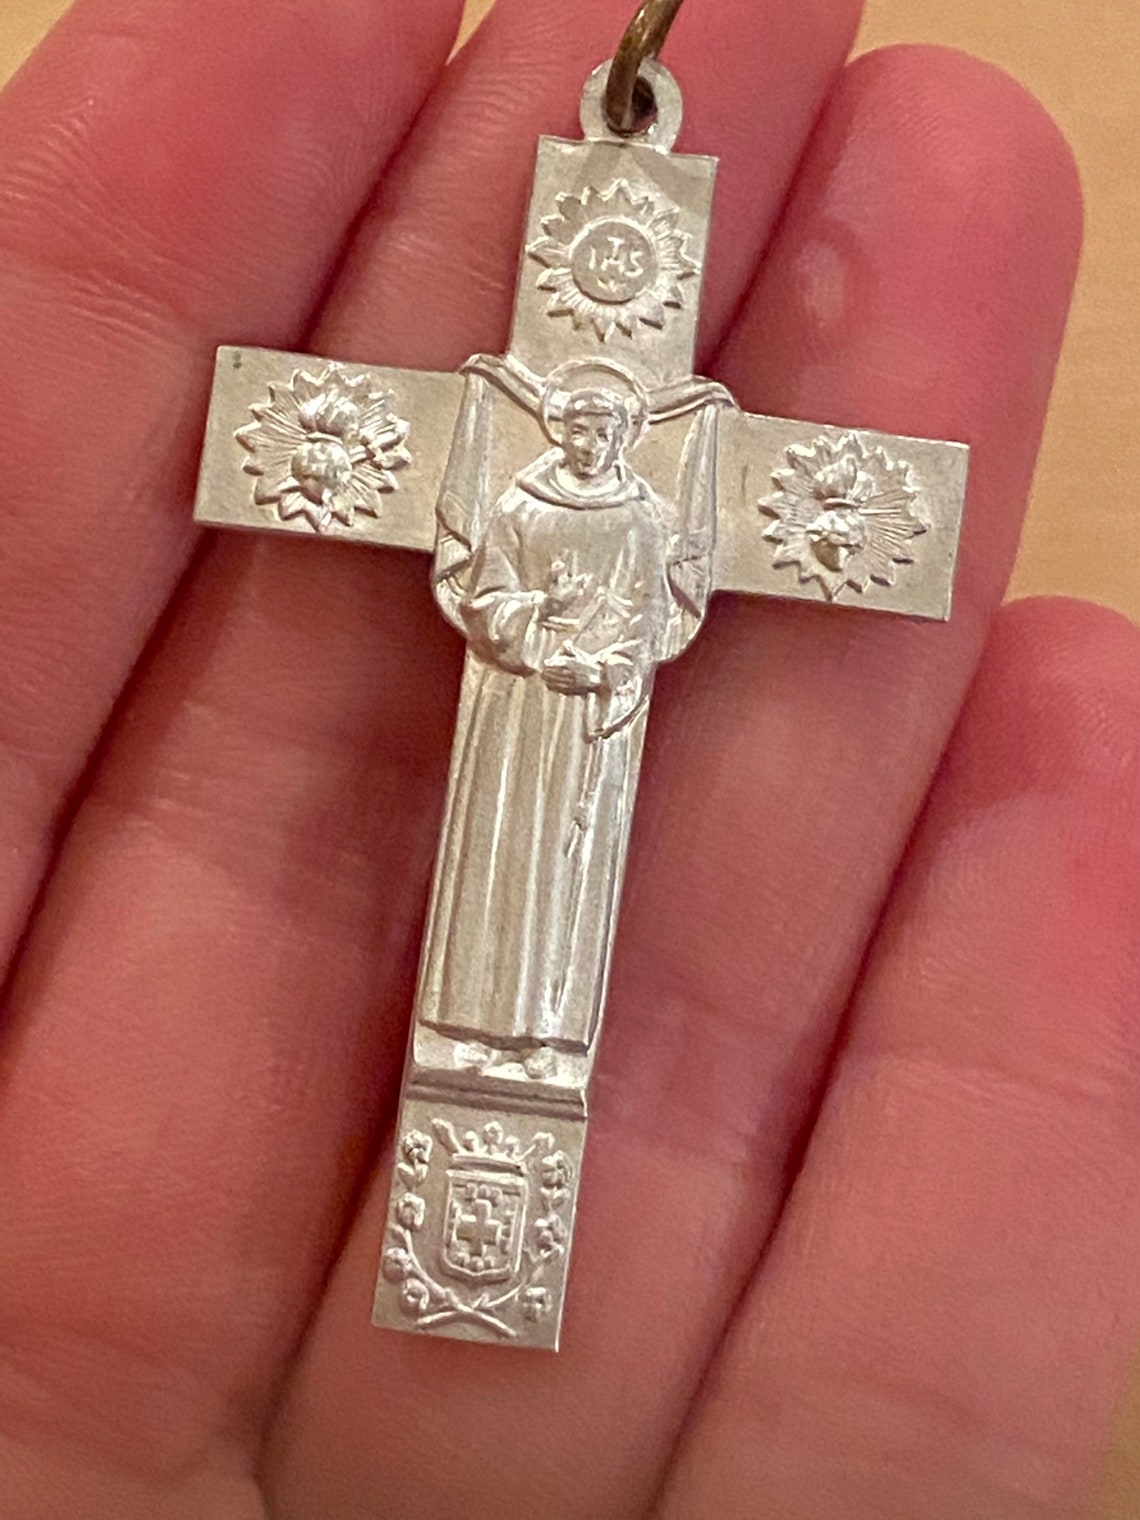 Rare St. Anthony's Brief Cross / Blessing of Saint Anthony | Etsy